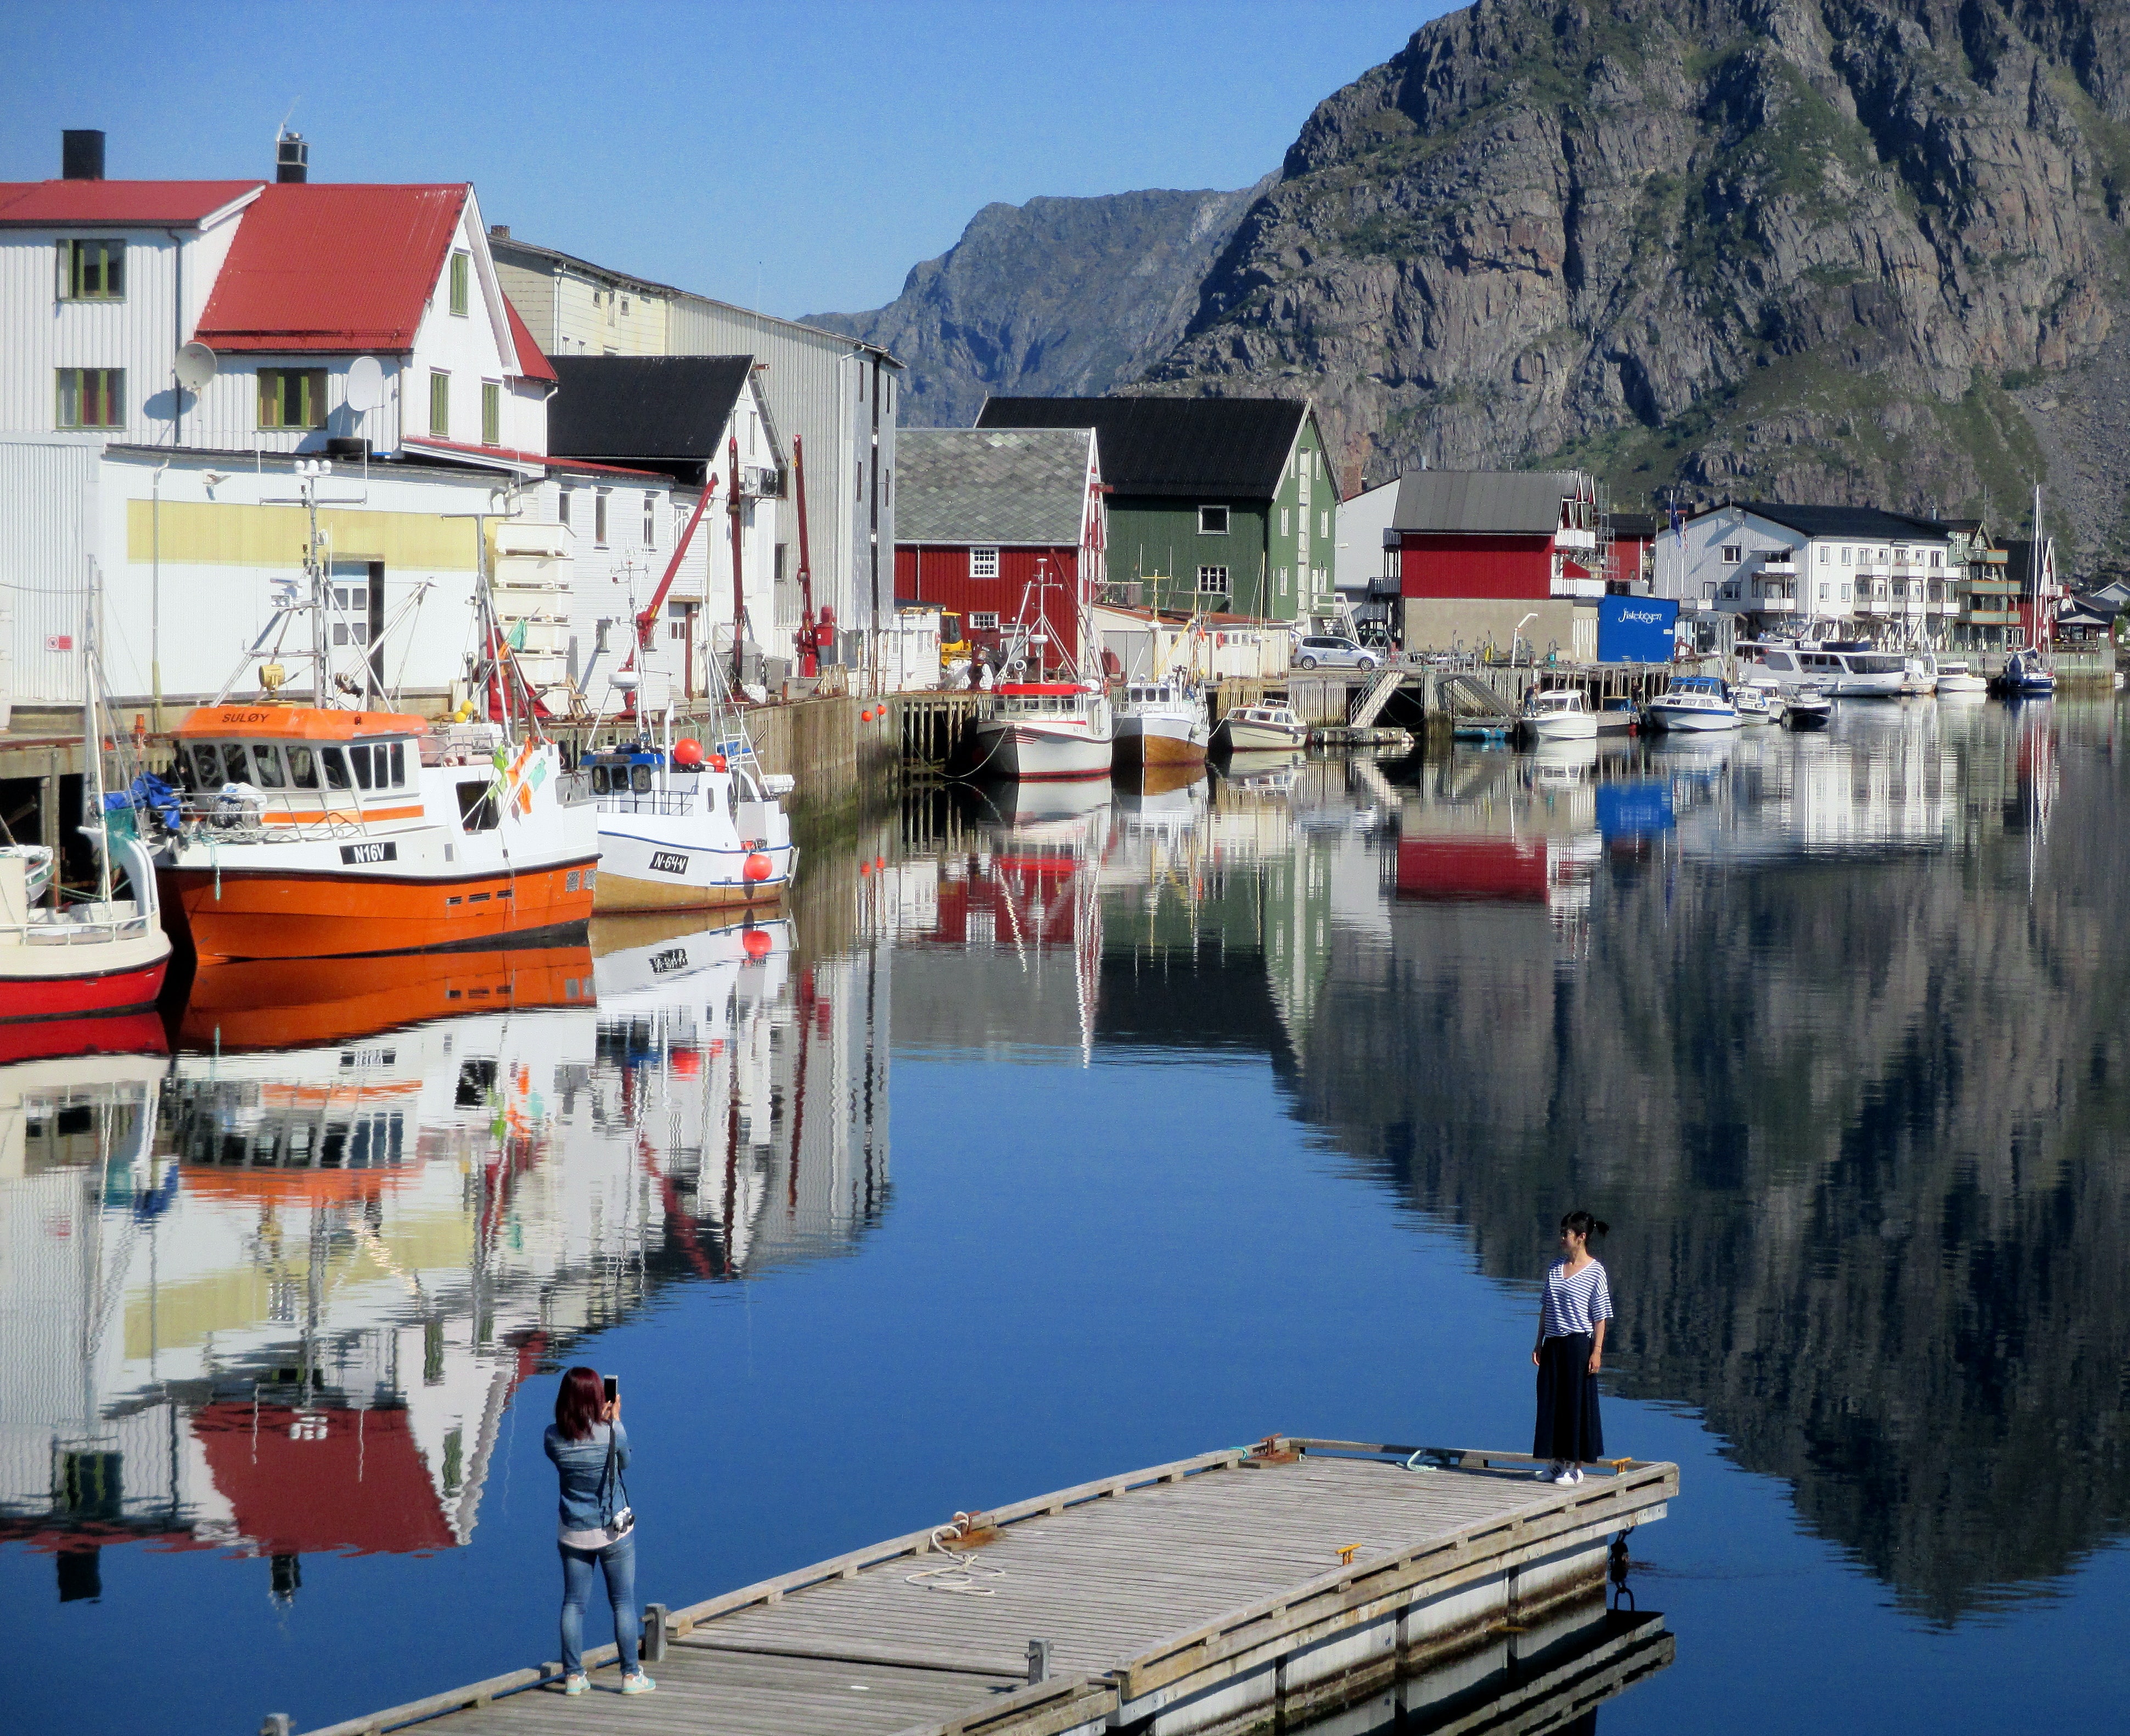 The picturesque fishing village of Henningsvaer.